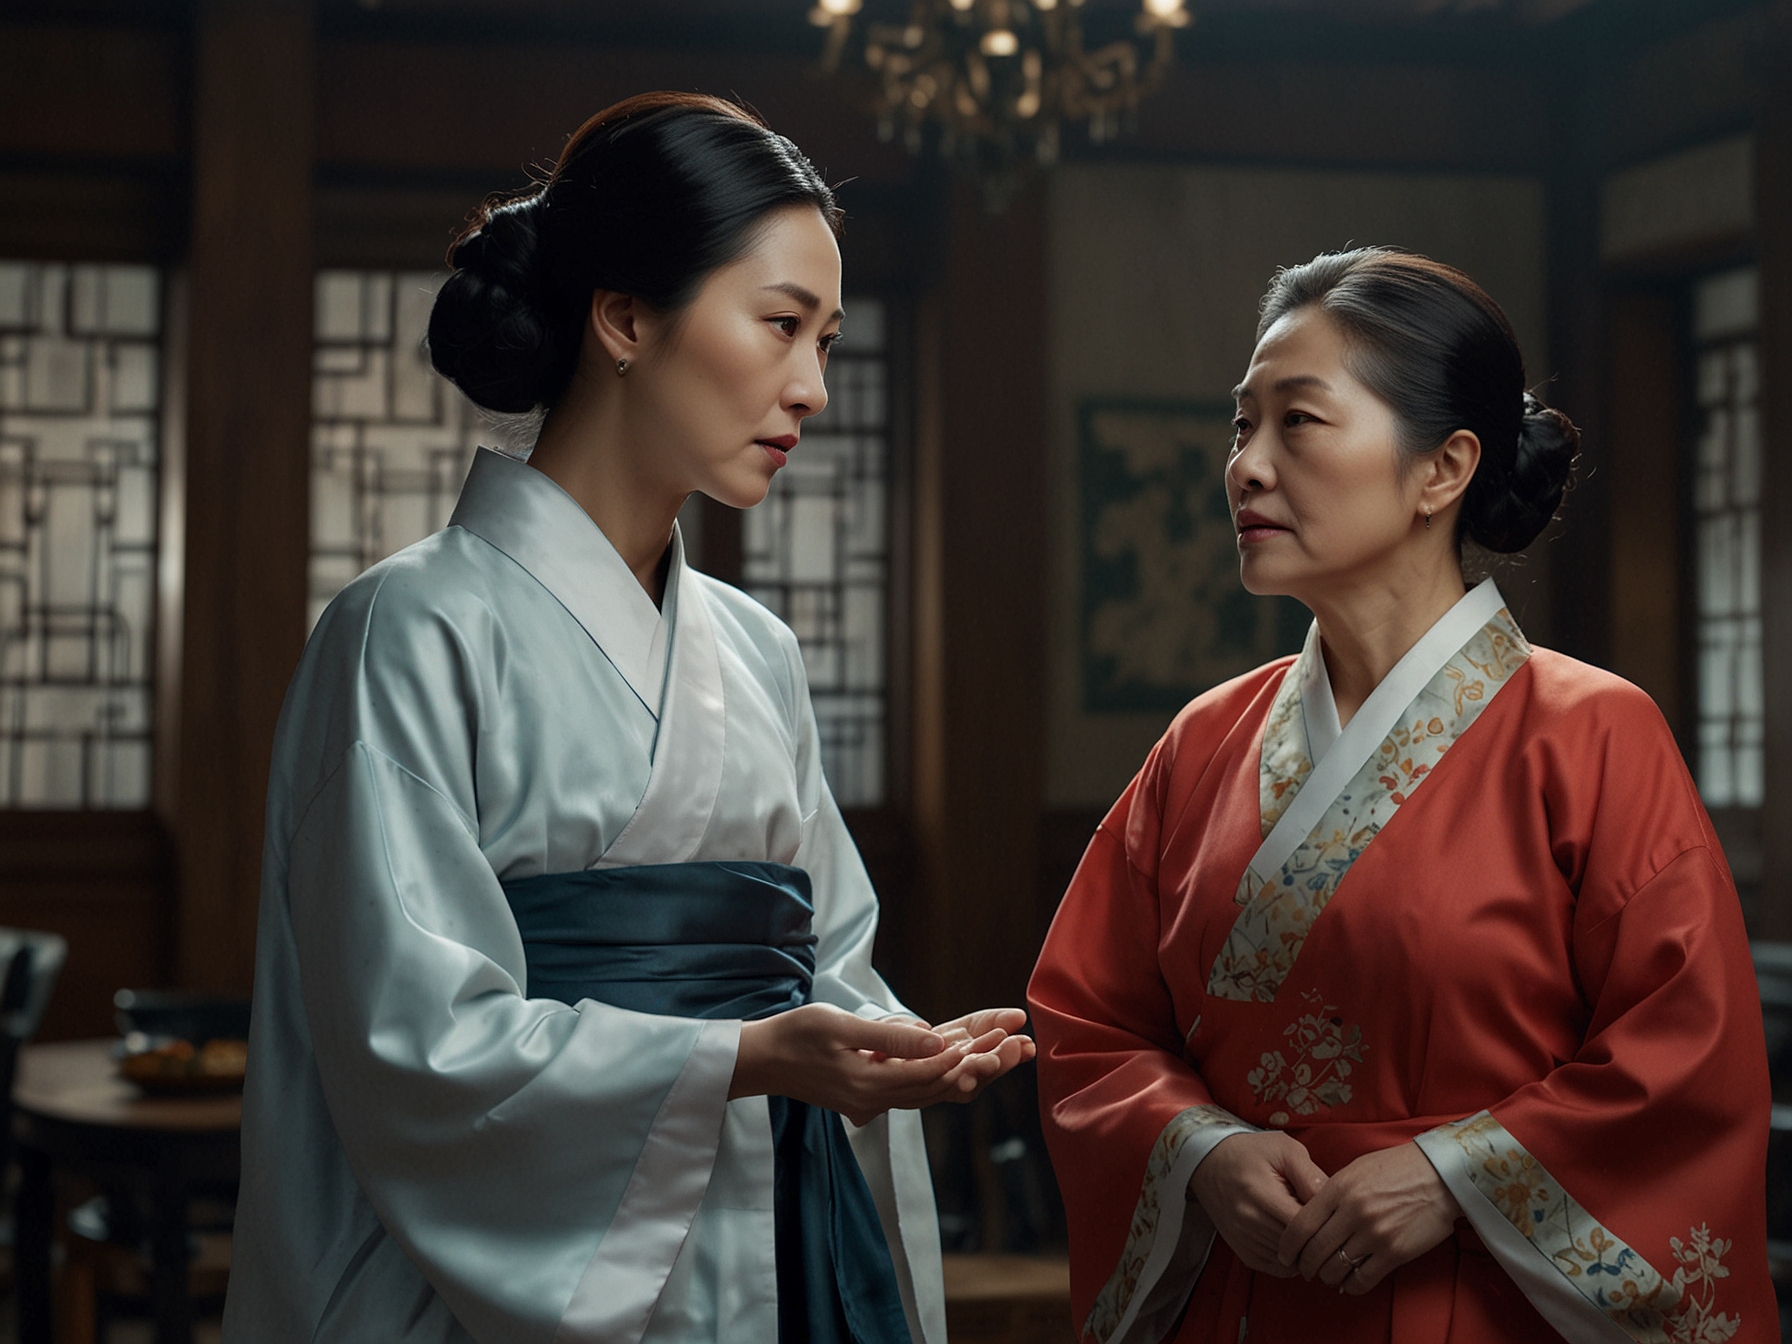 In the second still, the high-stakes power struggle is palpable as Oh Wan Soo confronts the matriarch played by Seo Yi Sook. The luxurious background contrasts with the intense, icy expressions of the two women.